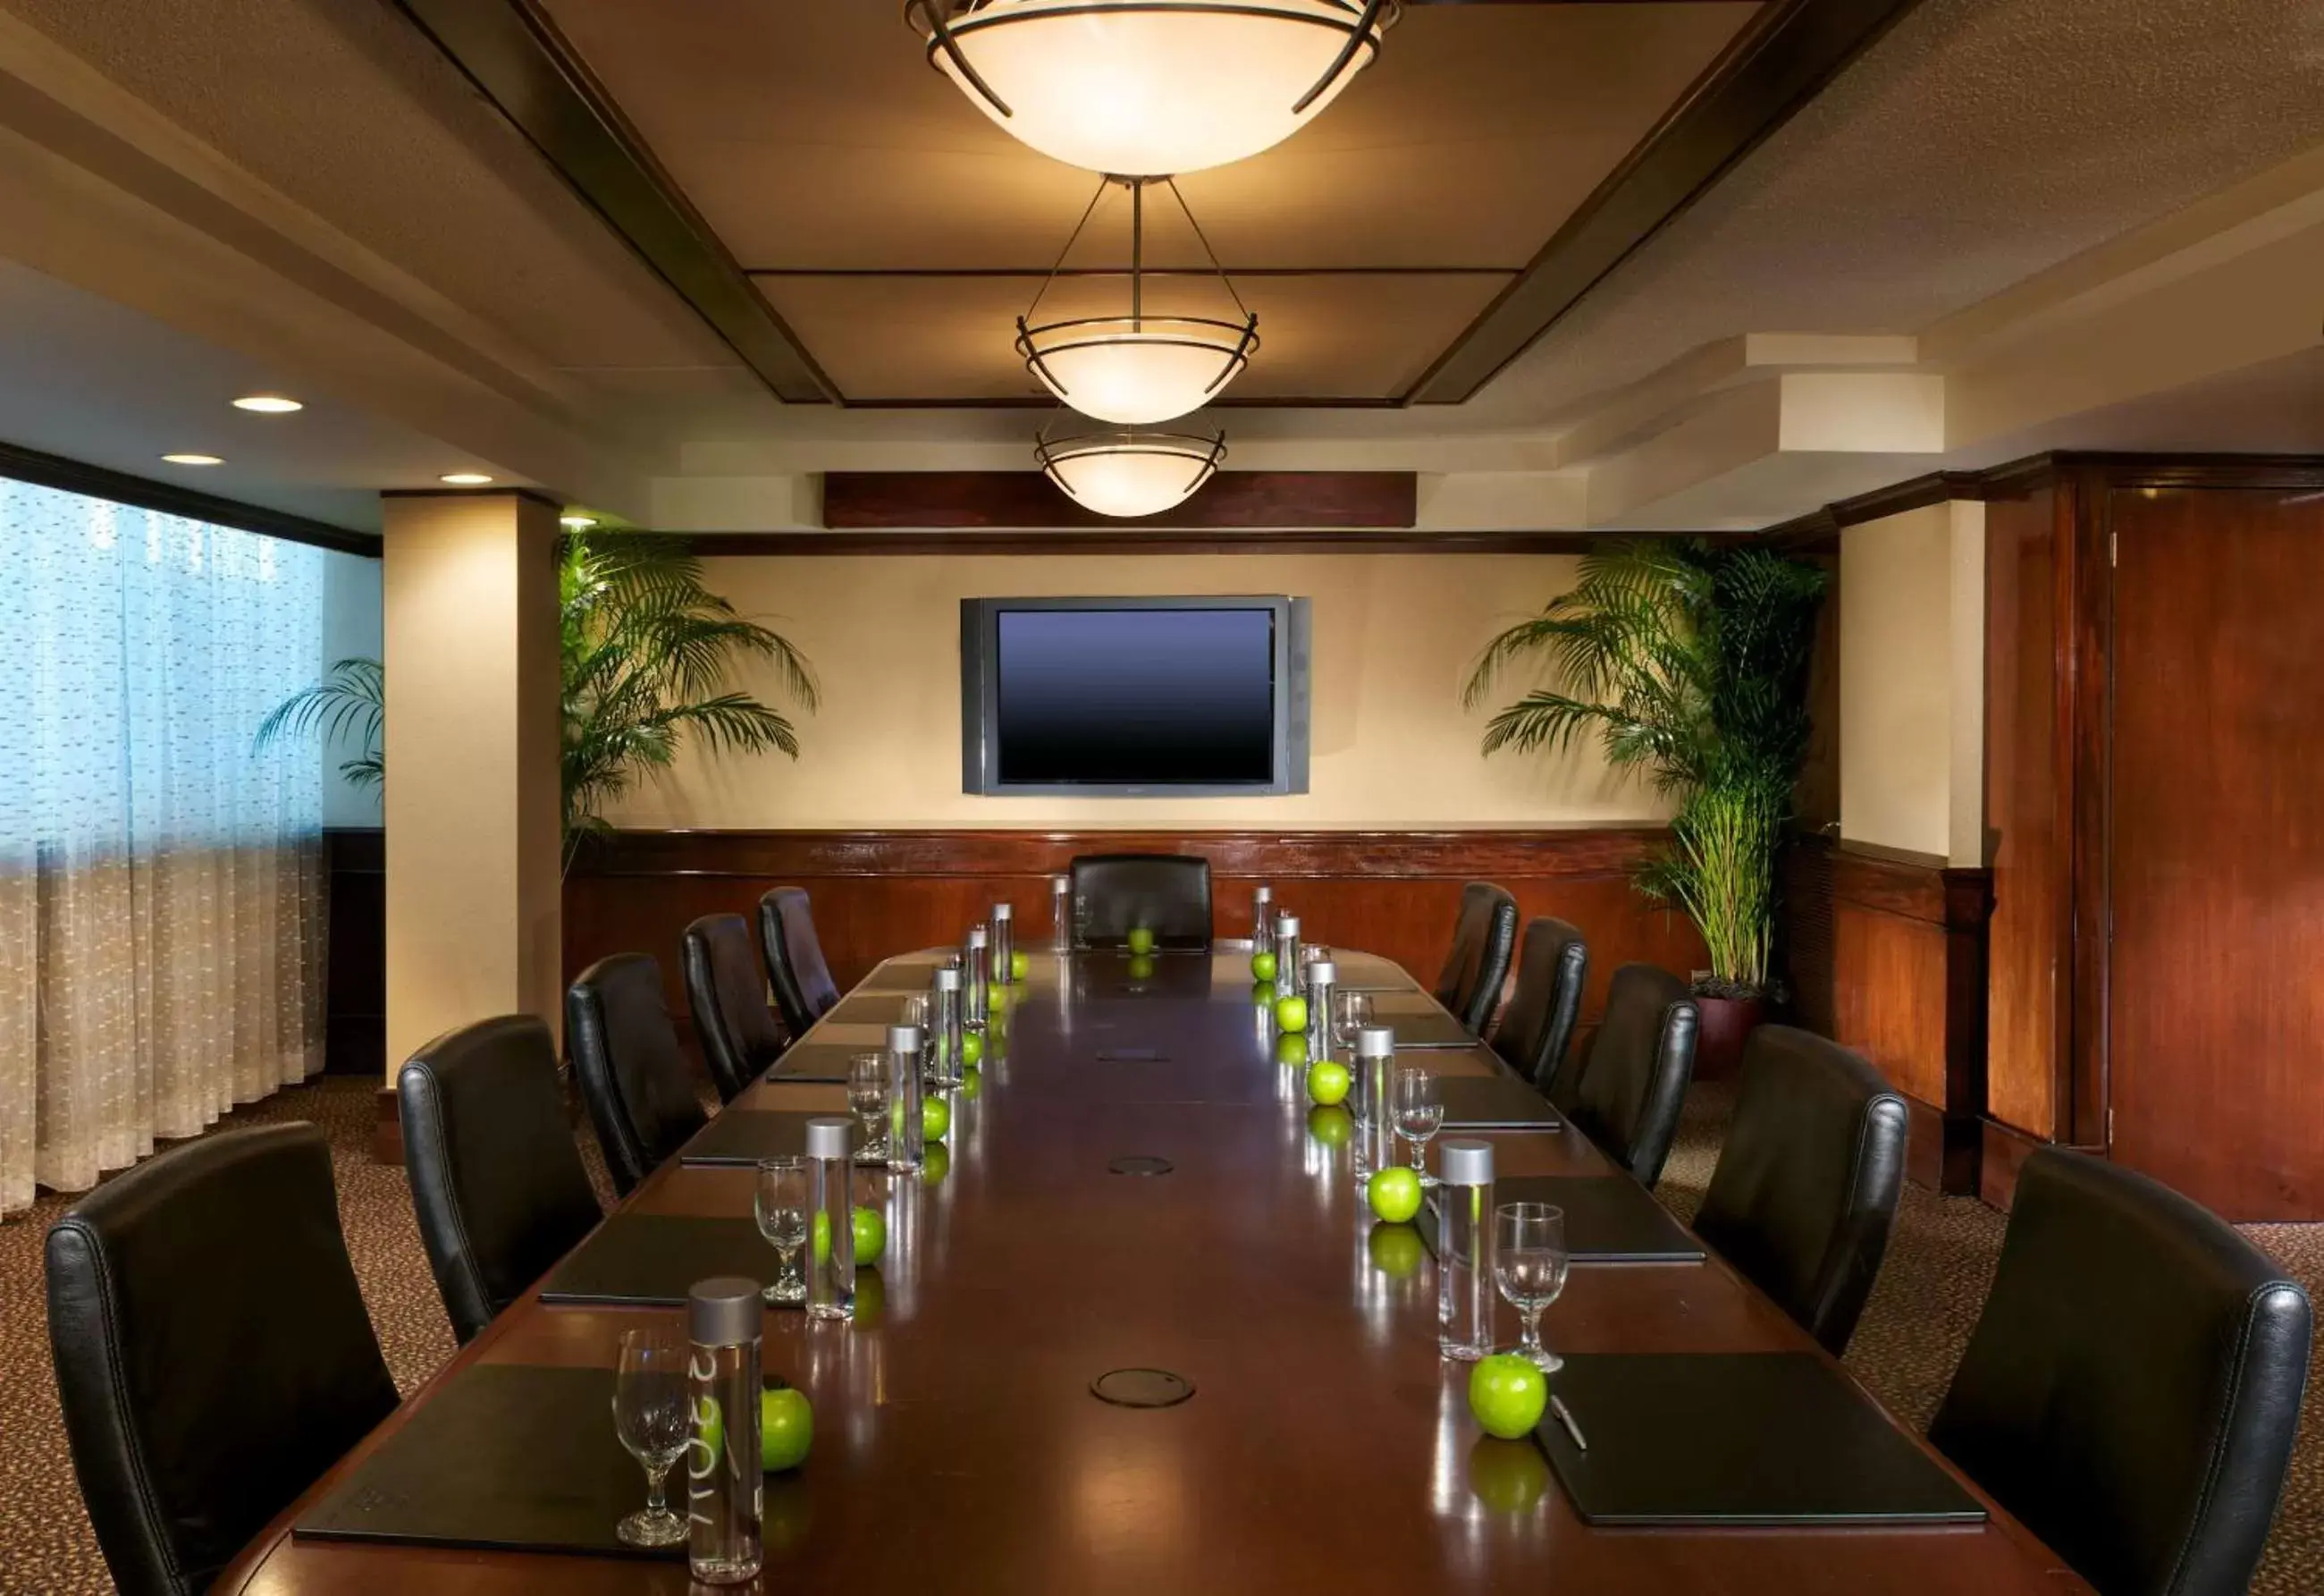 Meeting/conference room in Hilton College Station & Conference Center